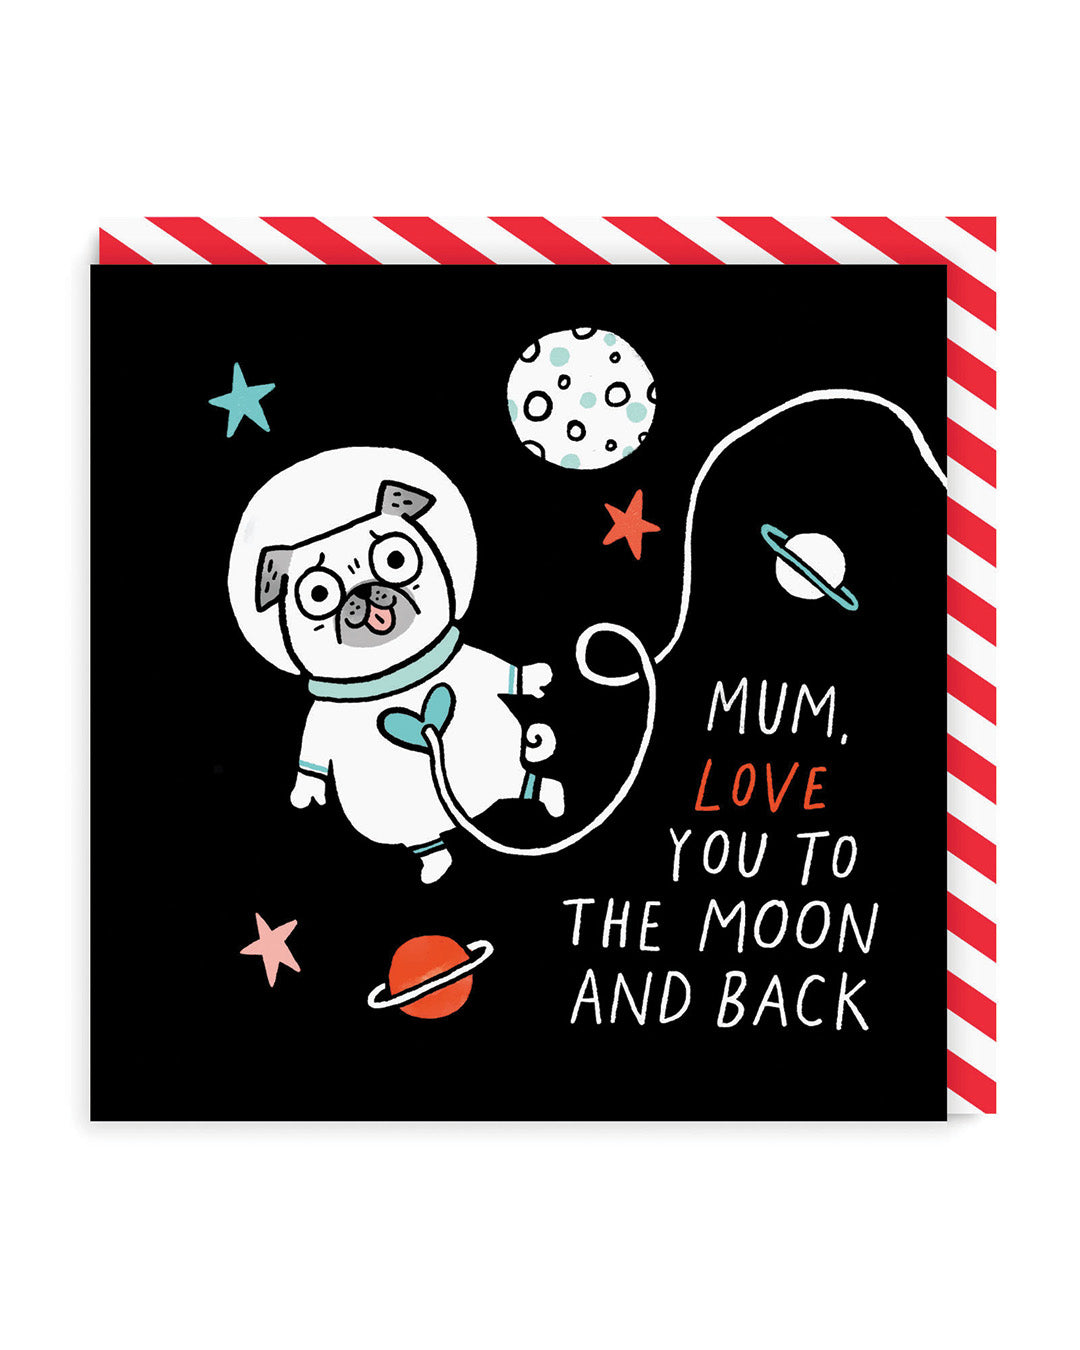 Mum Love You To The Moon and Back Square Greeting Card